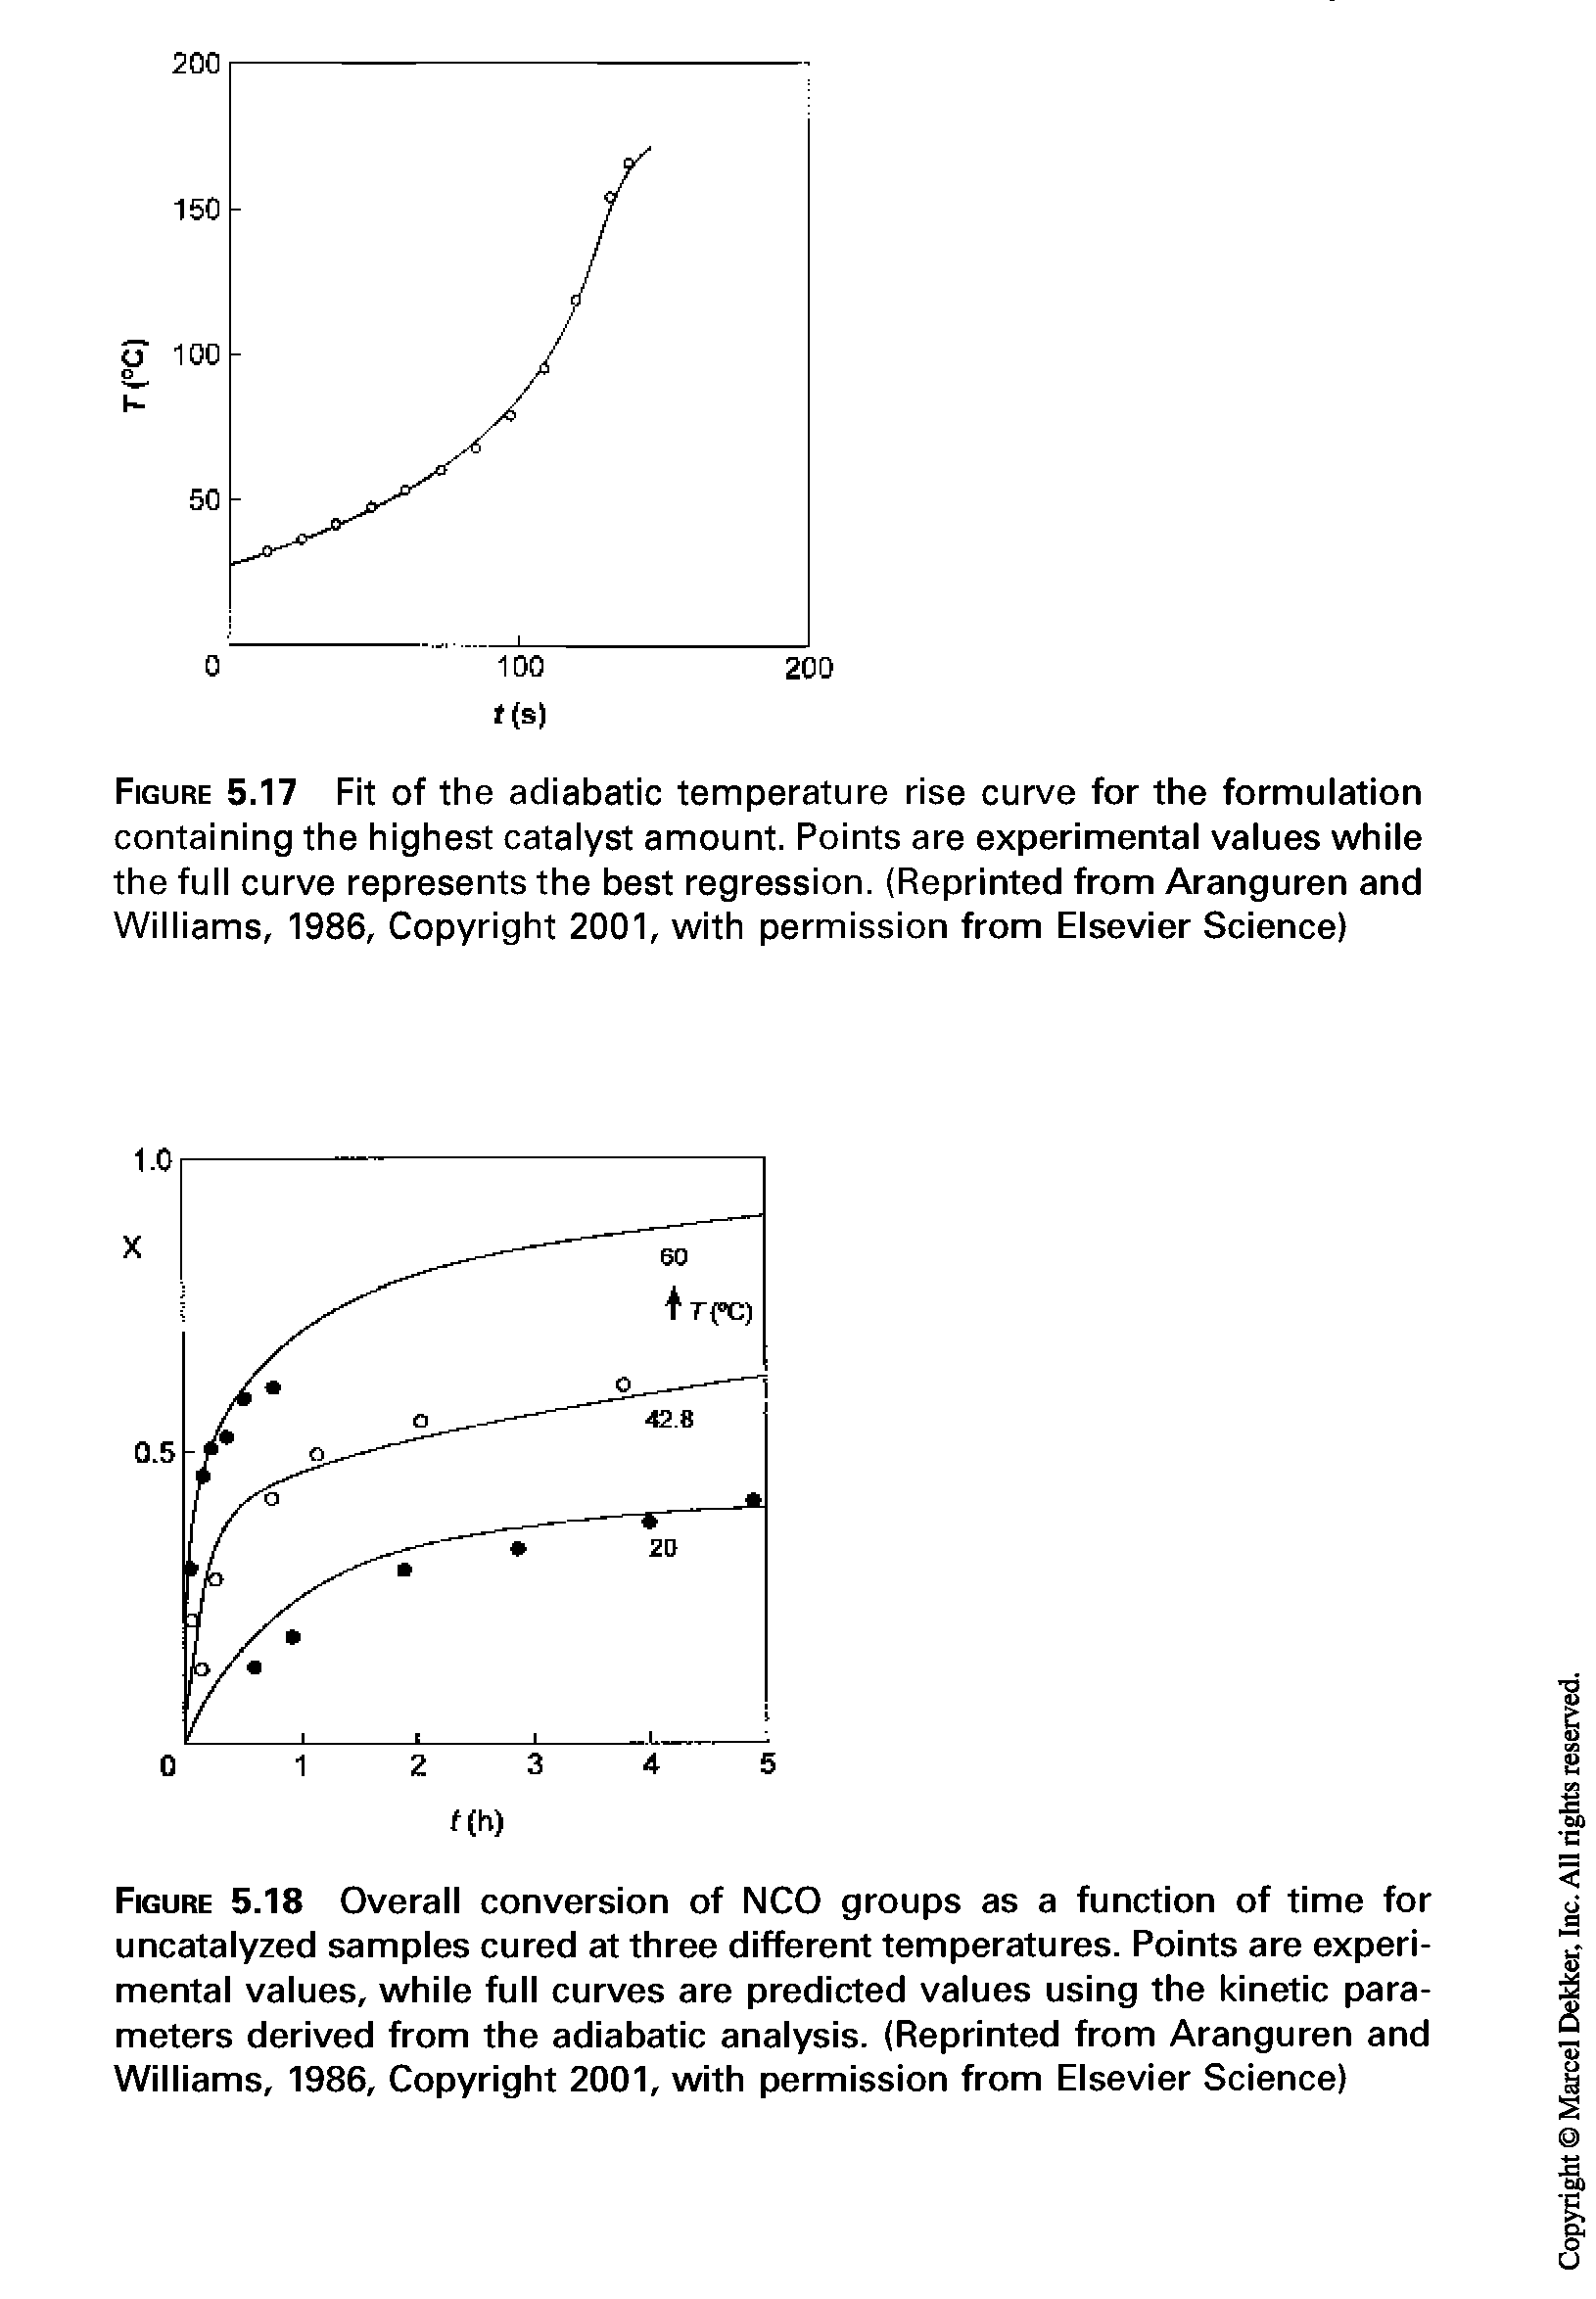 Figure 5.17 Fit of the adiabatic temperature rise curve for the formulation containing the highest catalyst amount. Points are experimental values while the full curve represents the best regression. (Reprinted from Aranguren and Williams, 1986, Copyright 2001, with permission from Elsevier Science)...